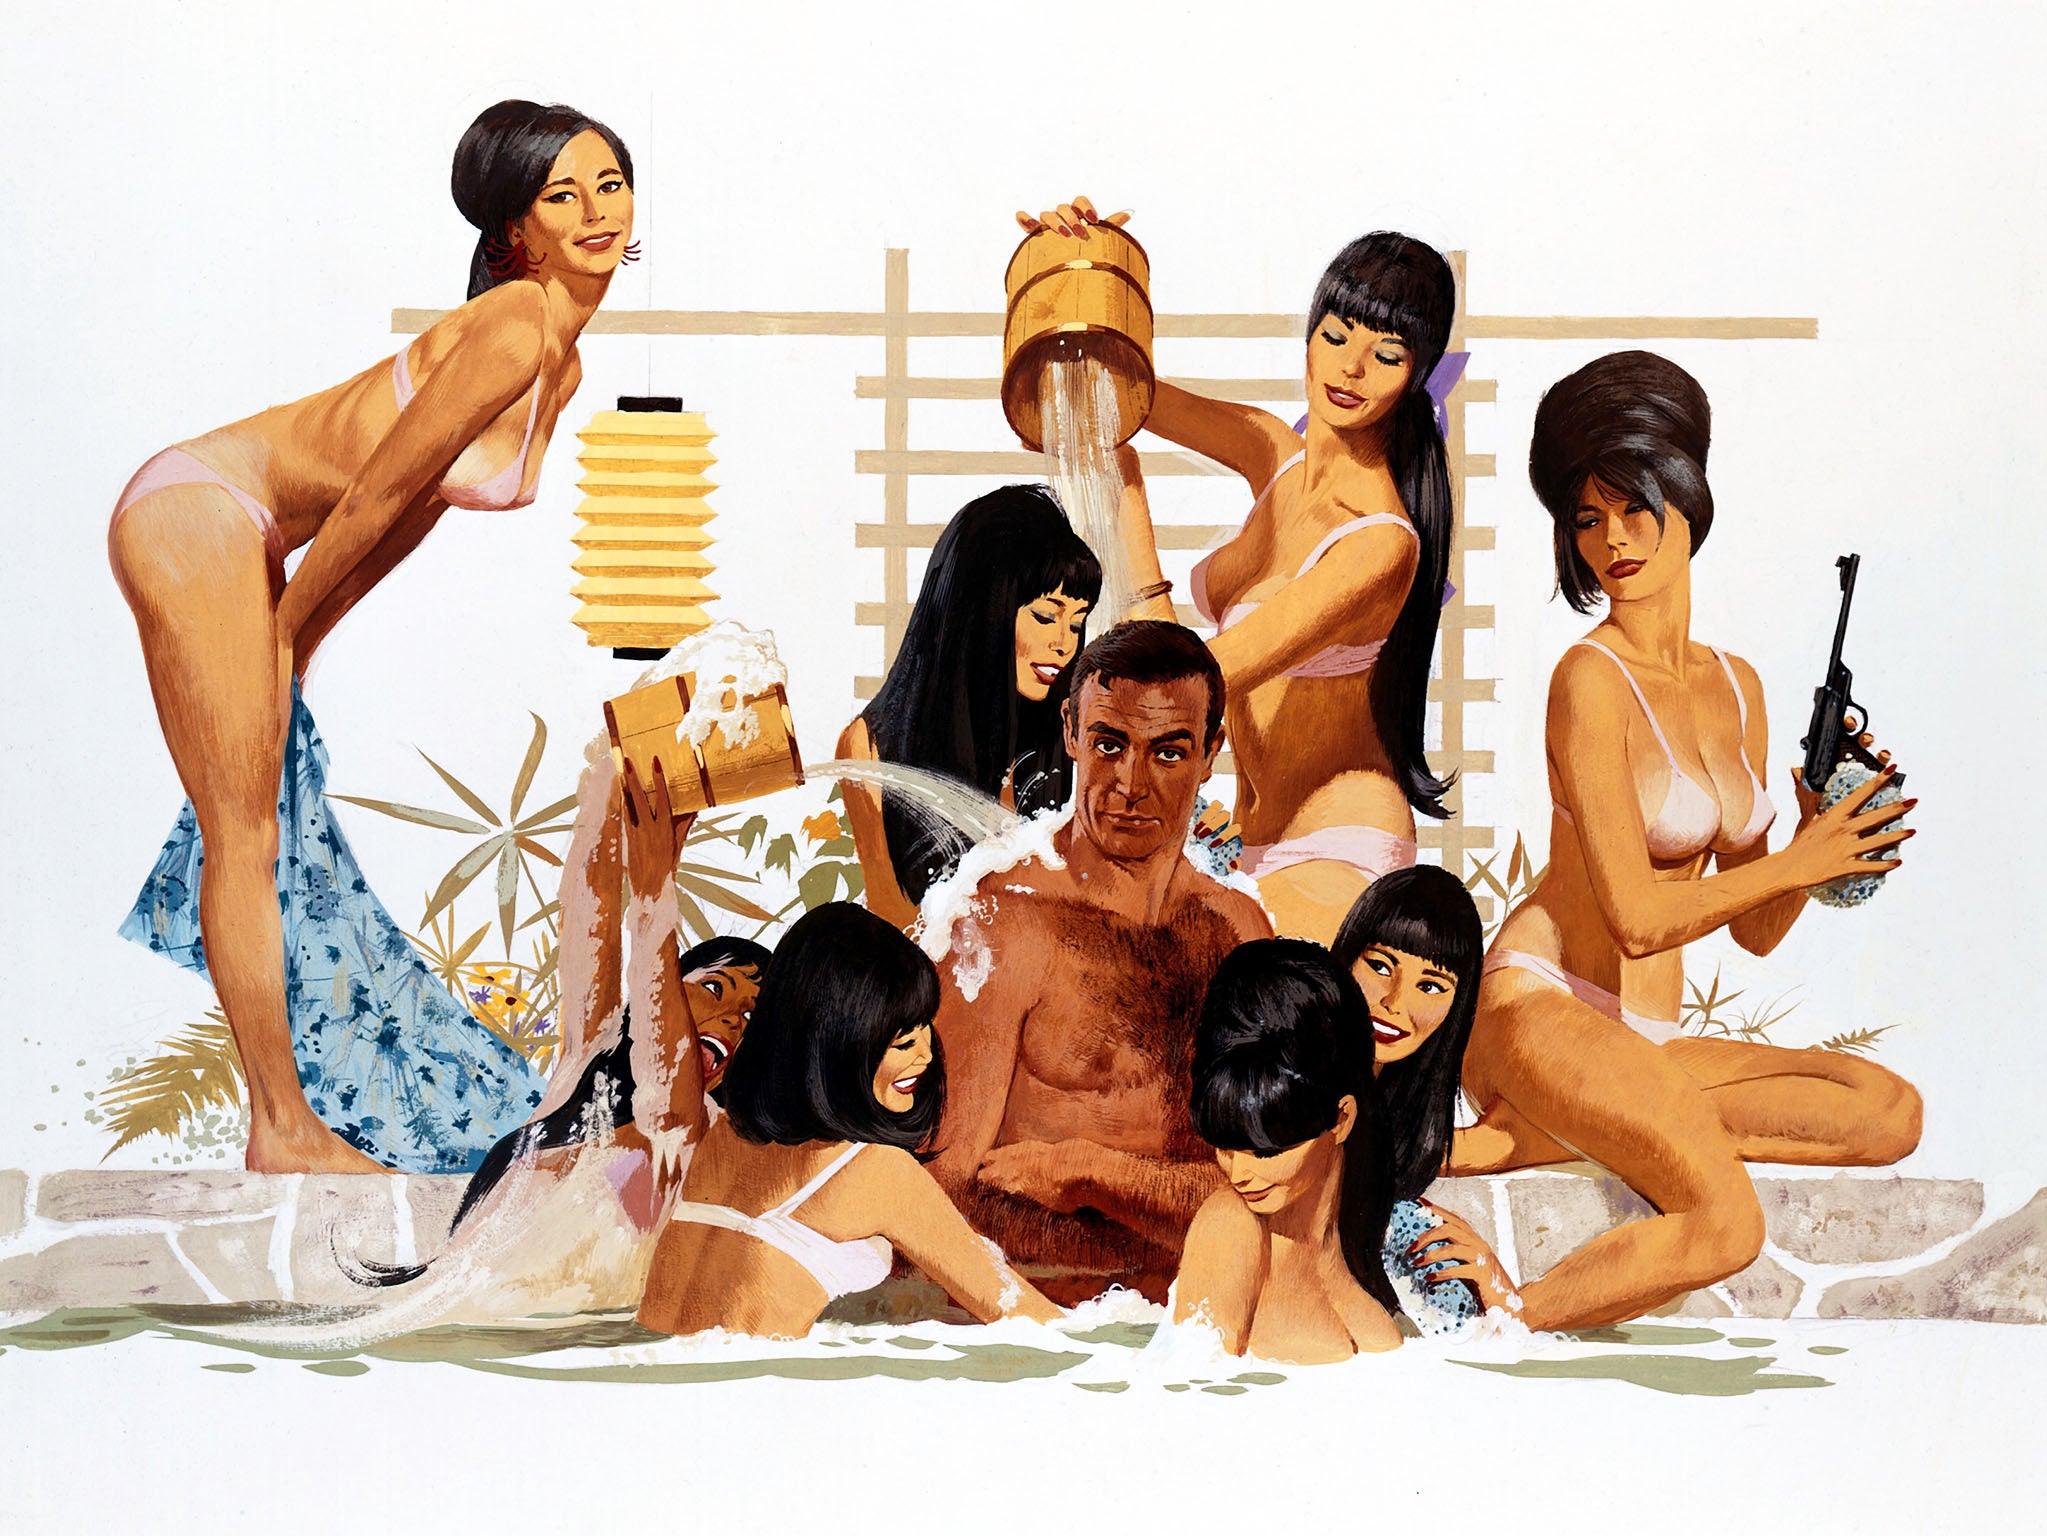 <p>Sean Connery’s James Bond in dubious promotional artwork for 1967’s ‘You Only Live Twice’ </p>